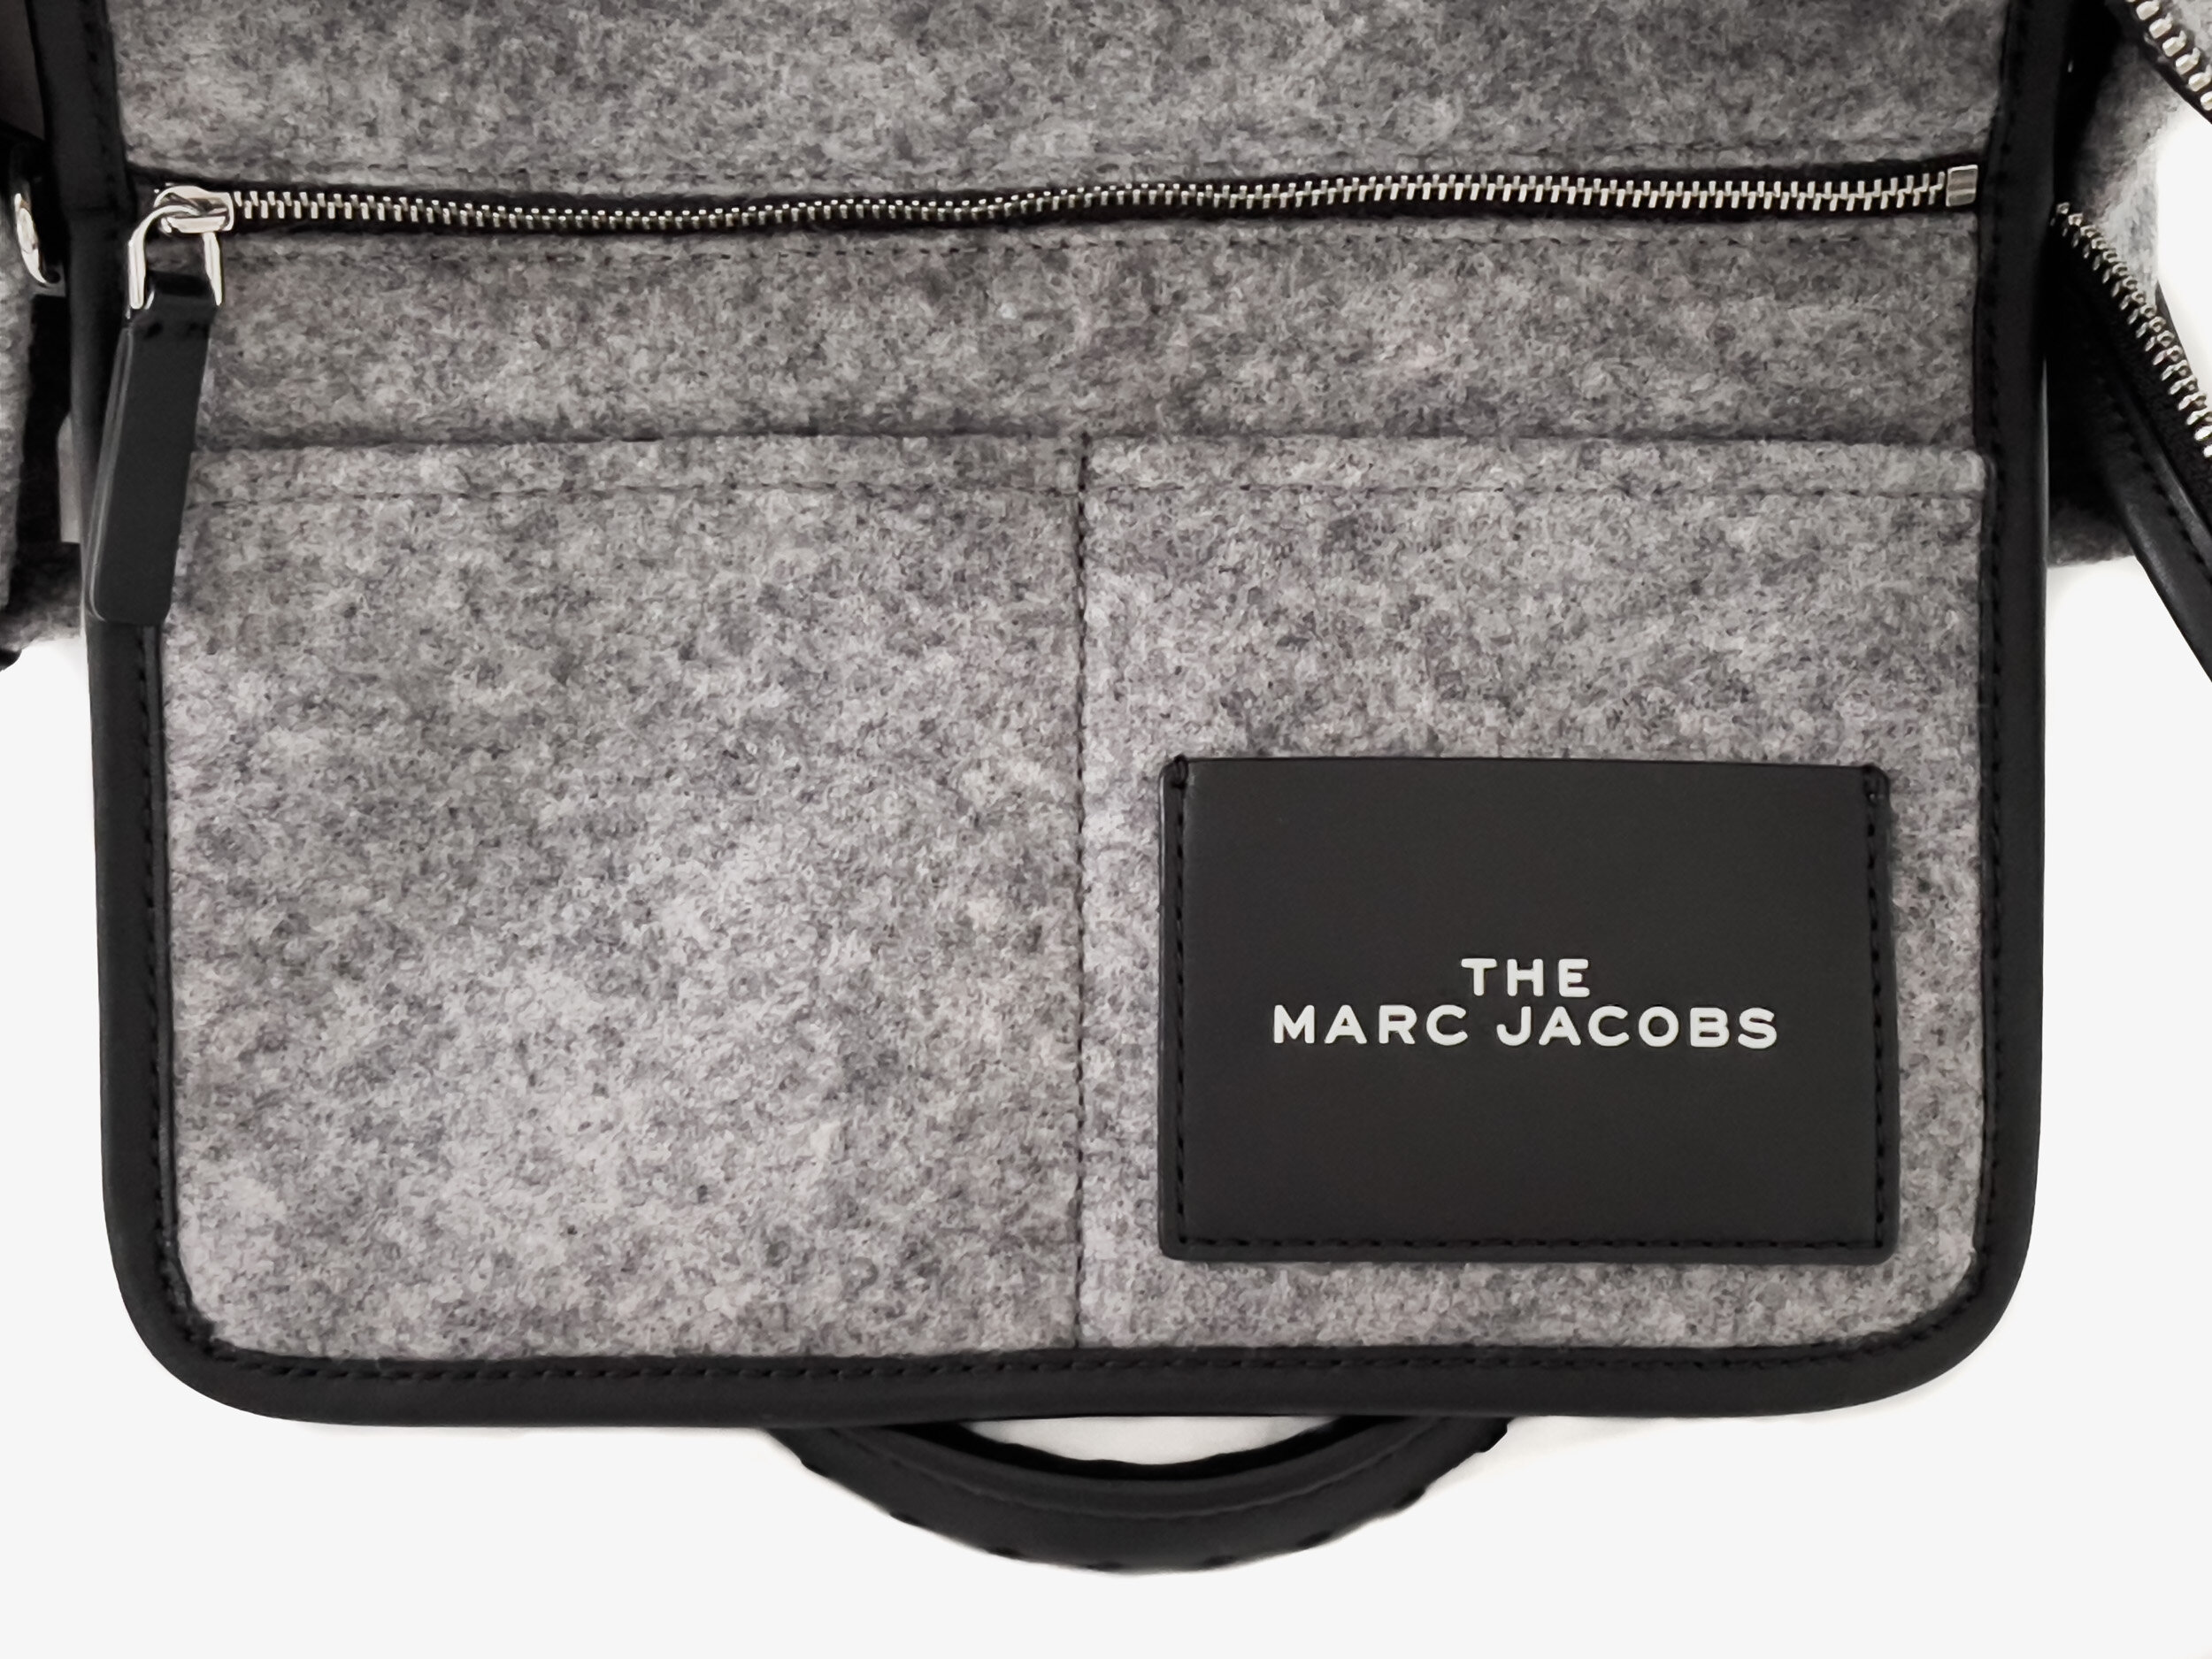 Marc Jacobs The Small Leather-Trim Traveler Tote Review